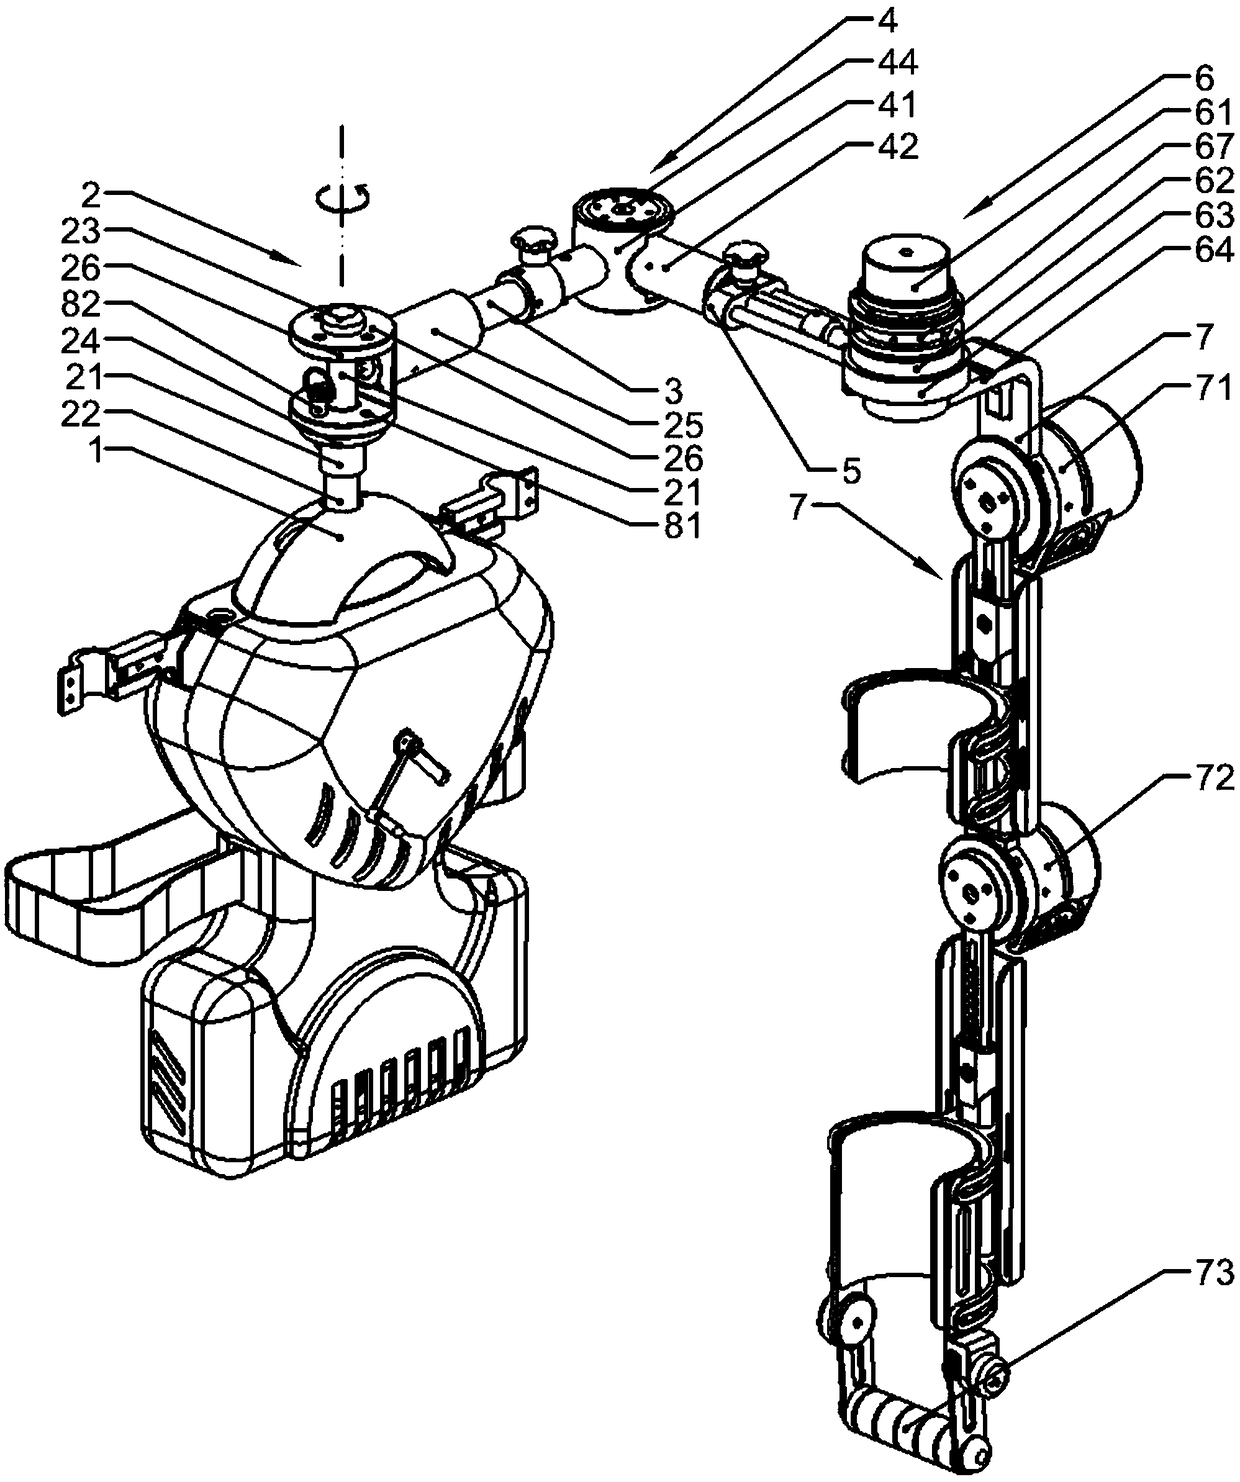 Upper-limb exoskeleton robot left and right hand interchanging device